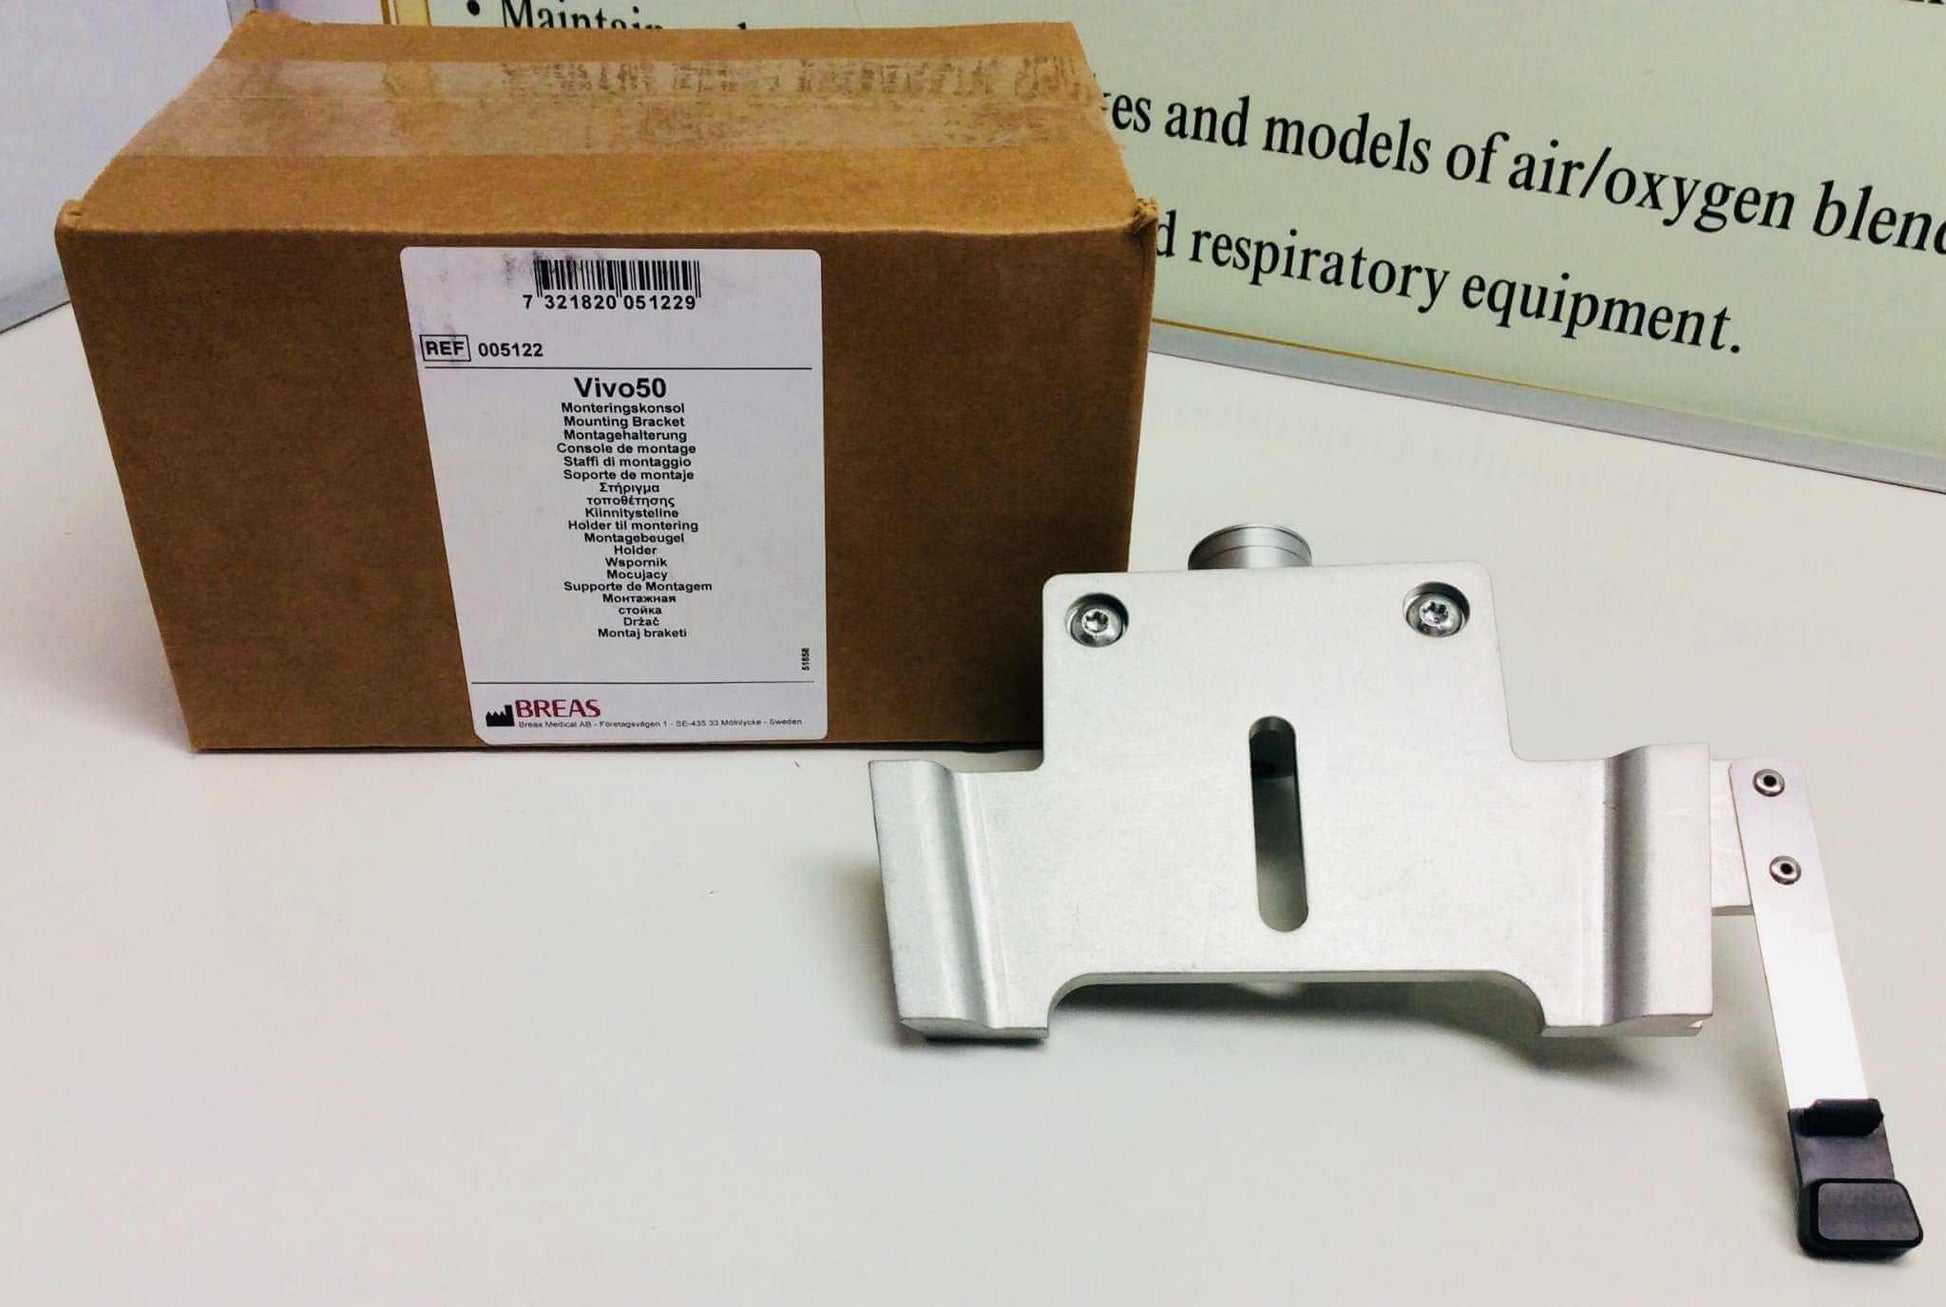 NEW Breas HDM Vivo 50 60 Medical Trolley Mounting Bracket 005122 Warranty FREE Shipping - MBR Medicals